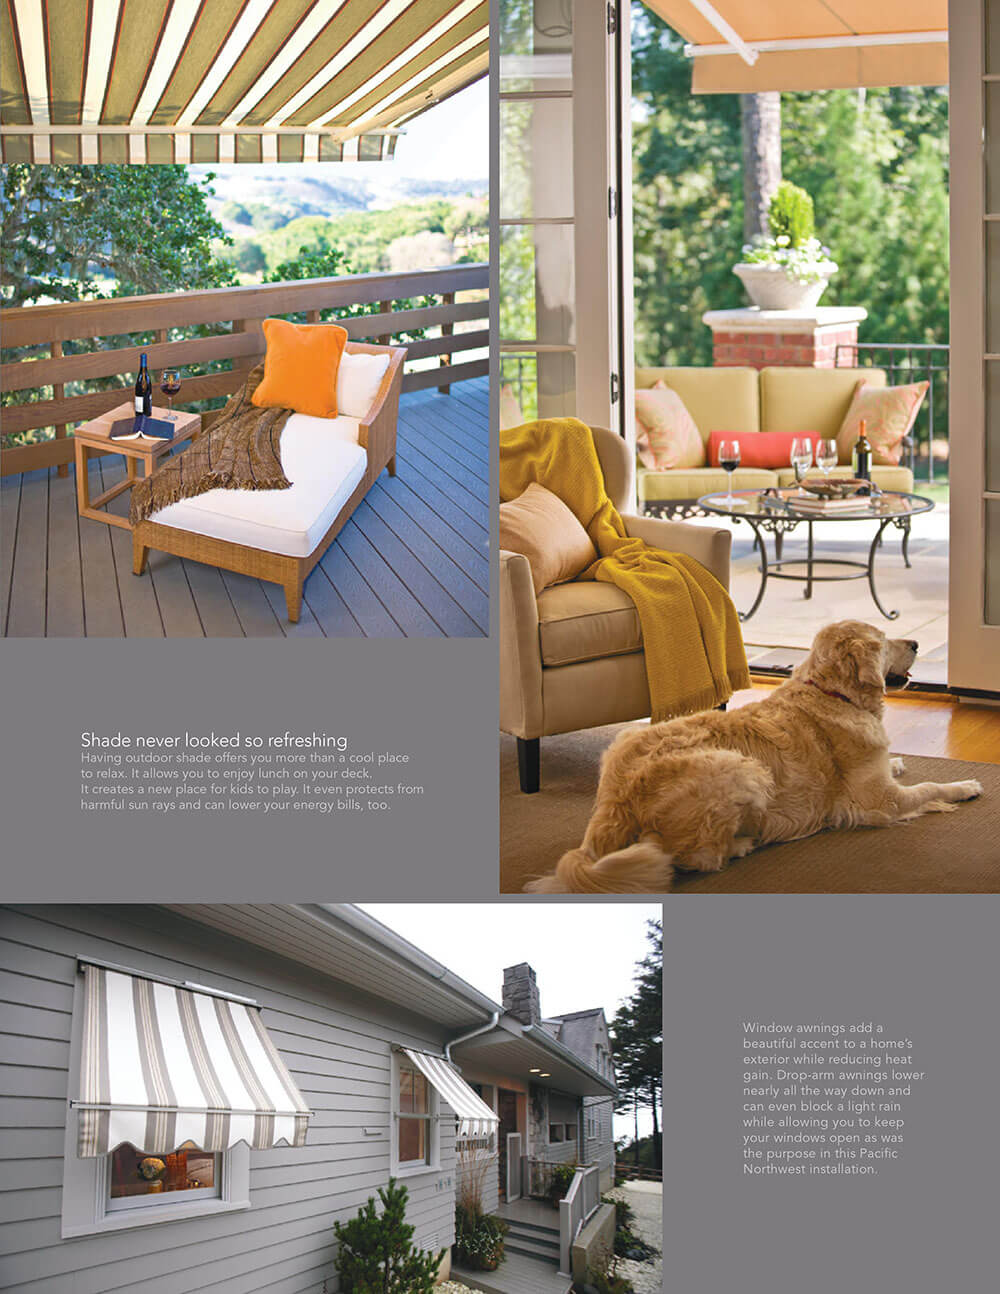 Collage Of Outdoor Living Spaces With Awnings